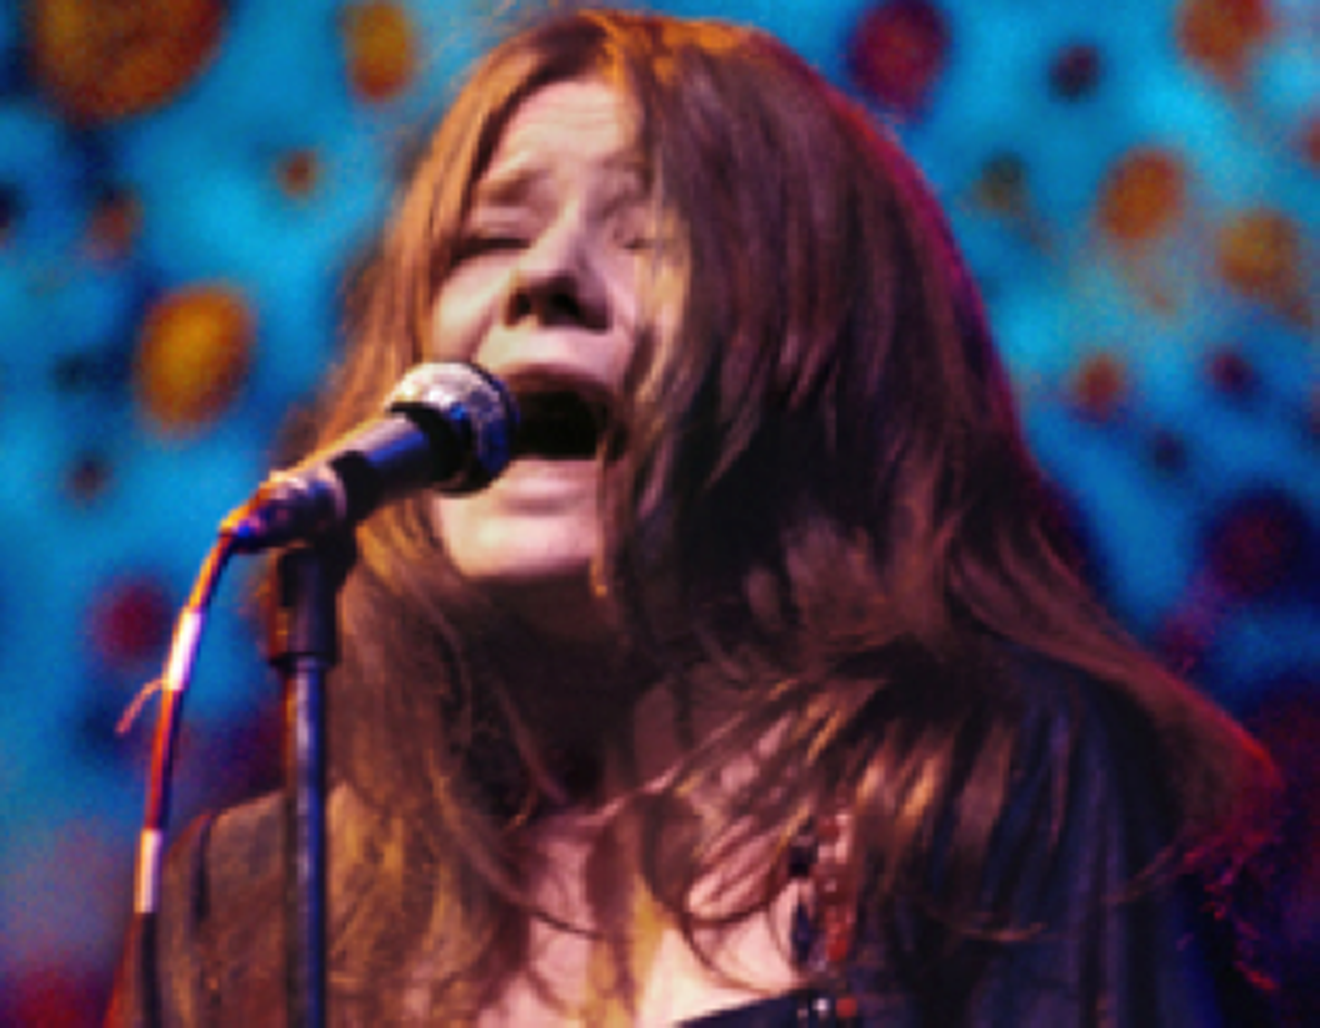 The late Janis Joplin was the subject of a popular documentary.